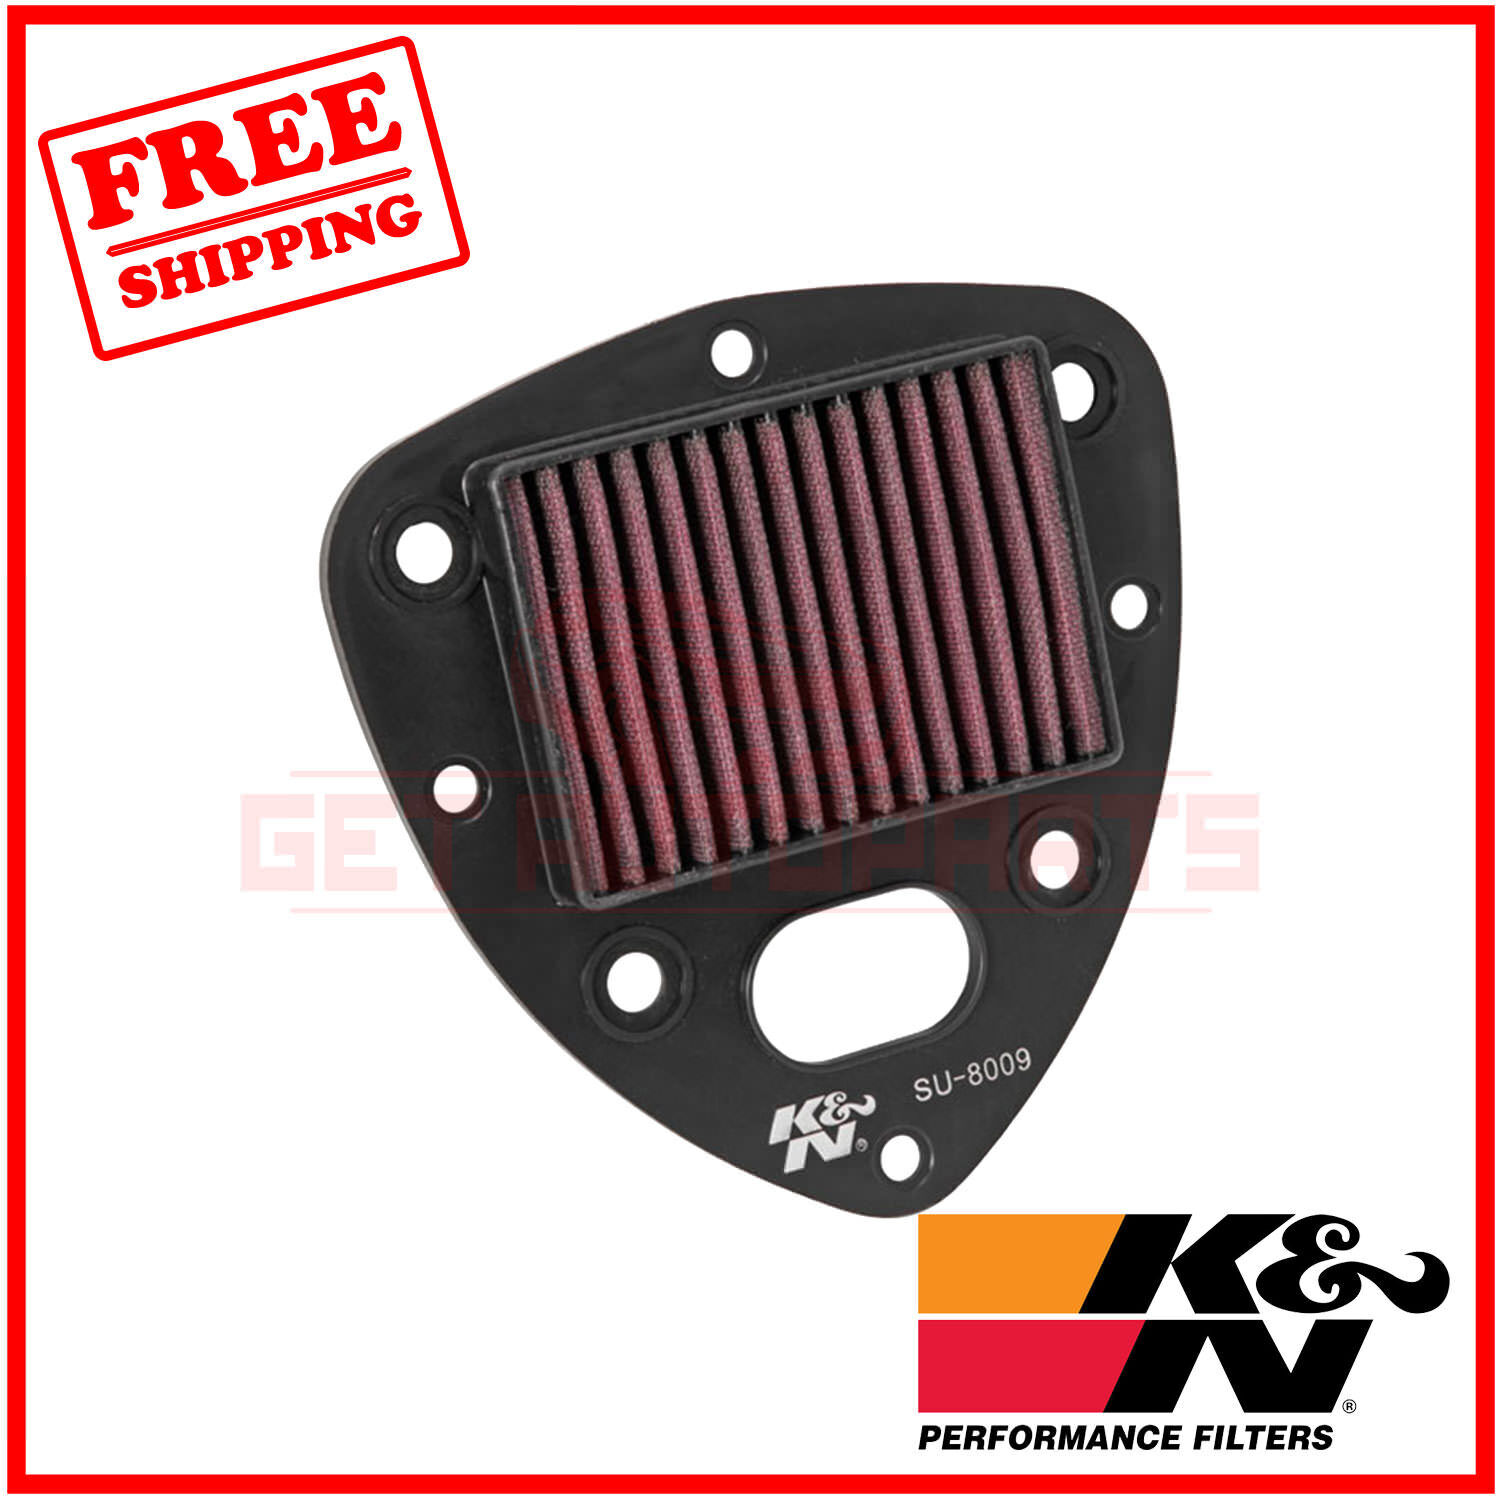 K&N Replacement Air Filter for Suzuki C50 Boulevard B.O.S.S. 2014